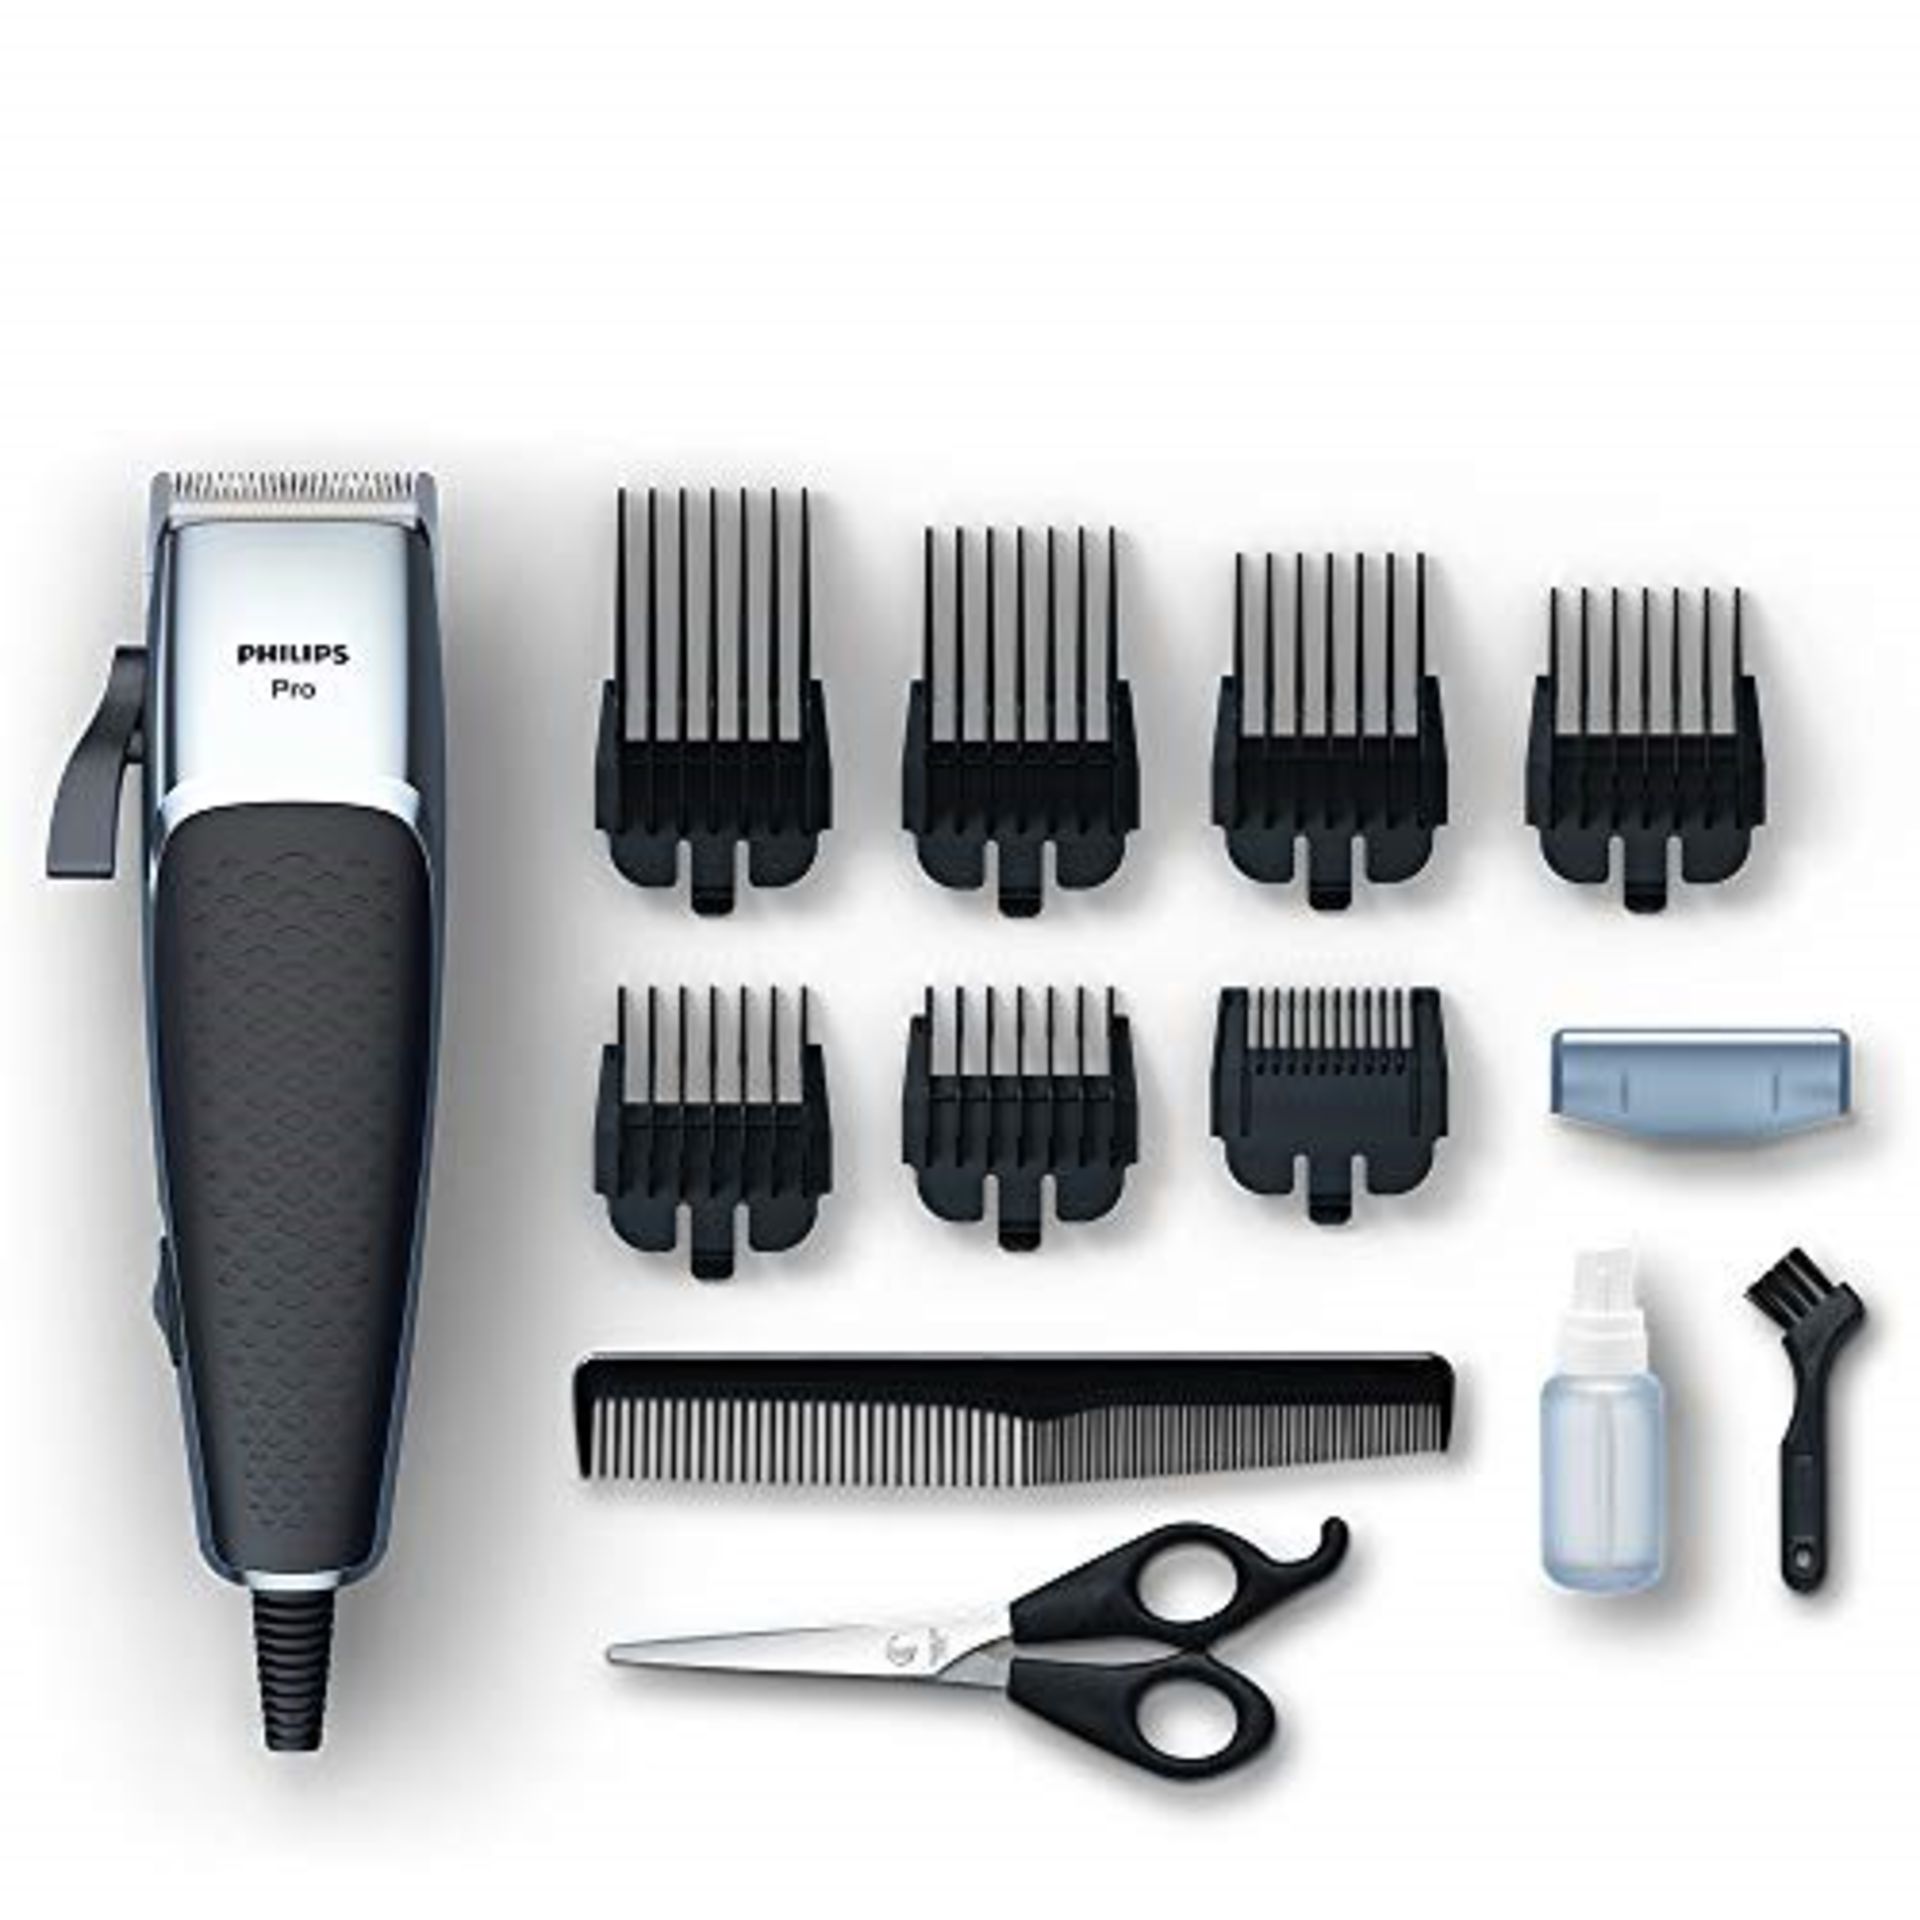 Philips Hair Clippers for Men, Series 5000 Professional Hair Clipper and Beard Trimmer